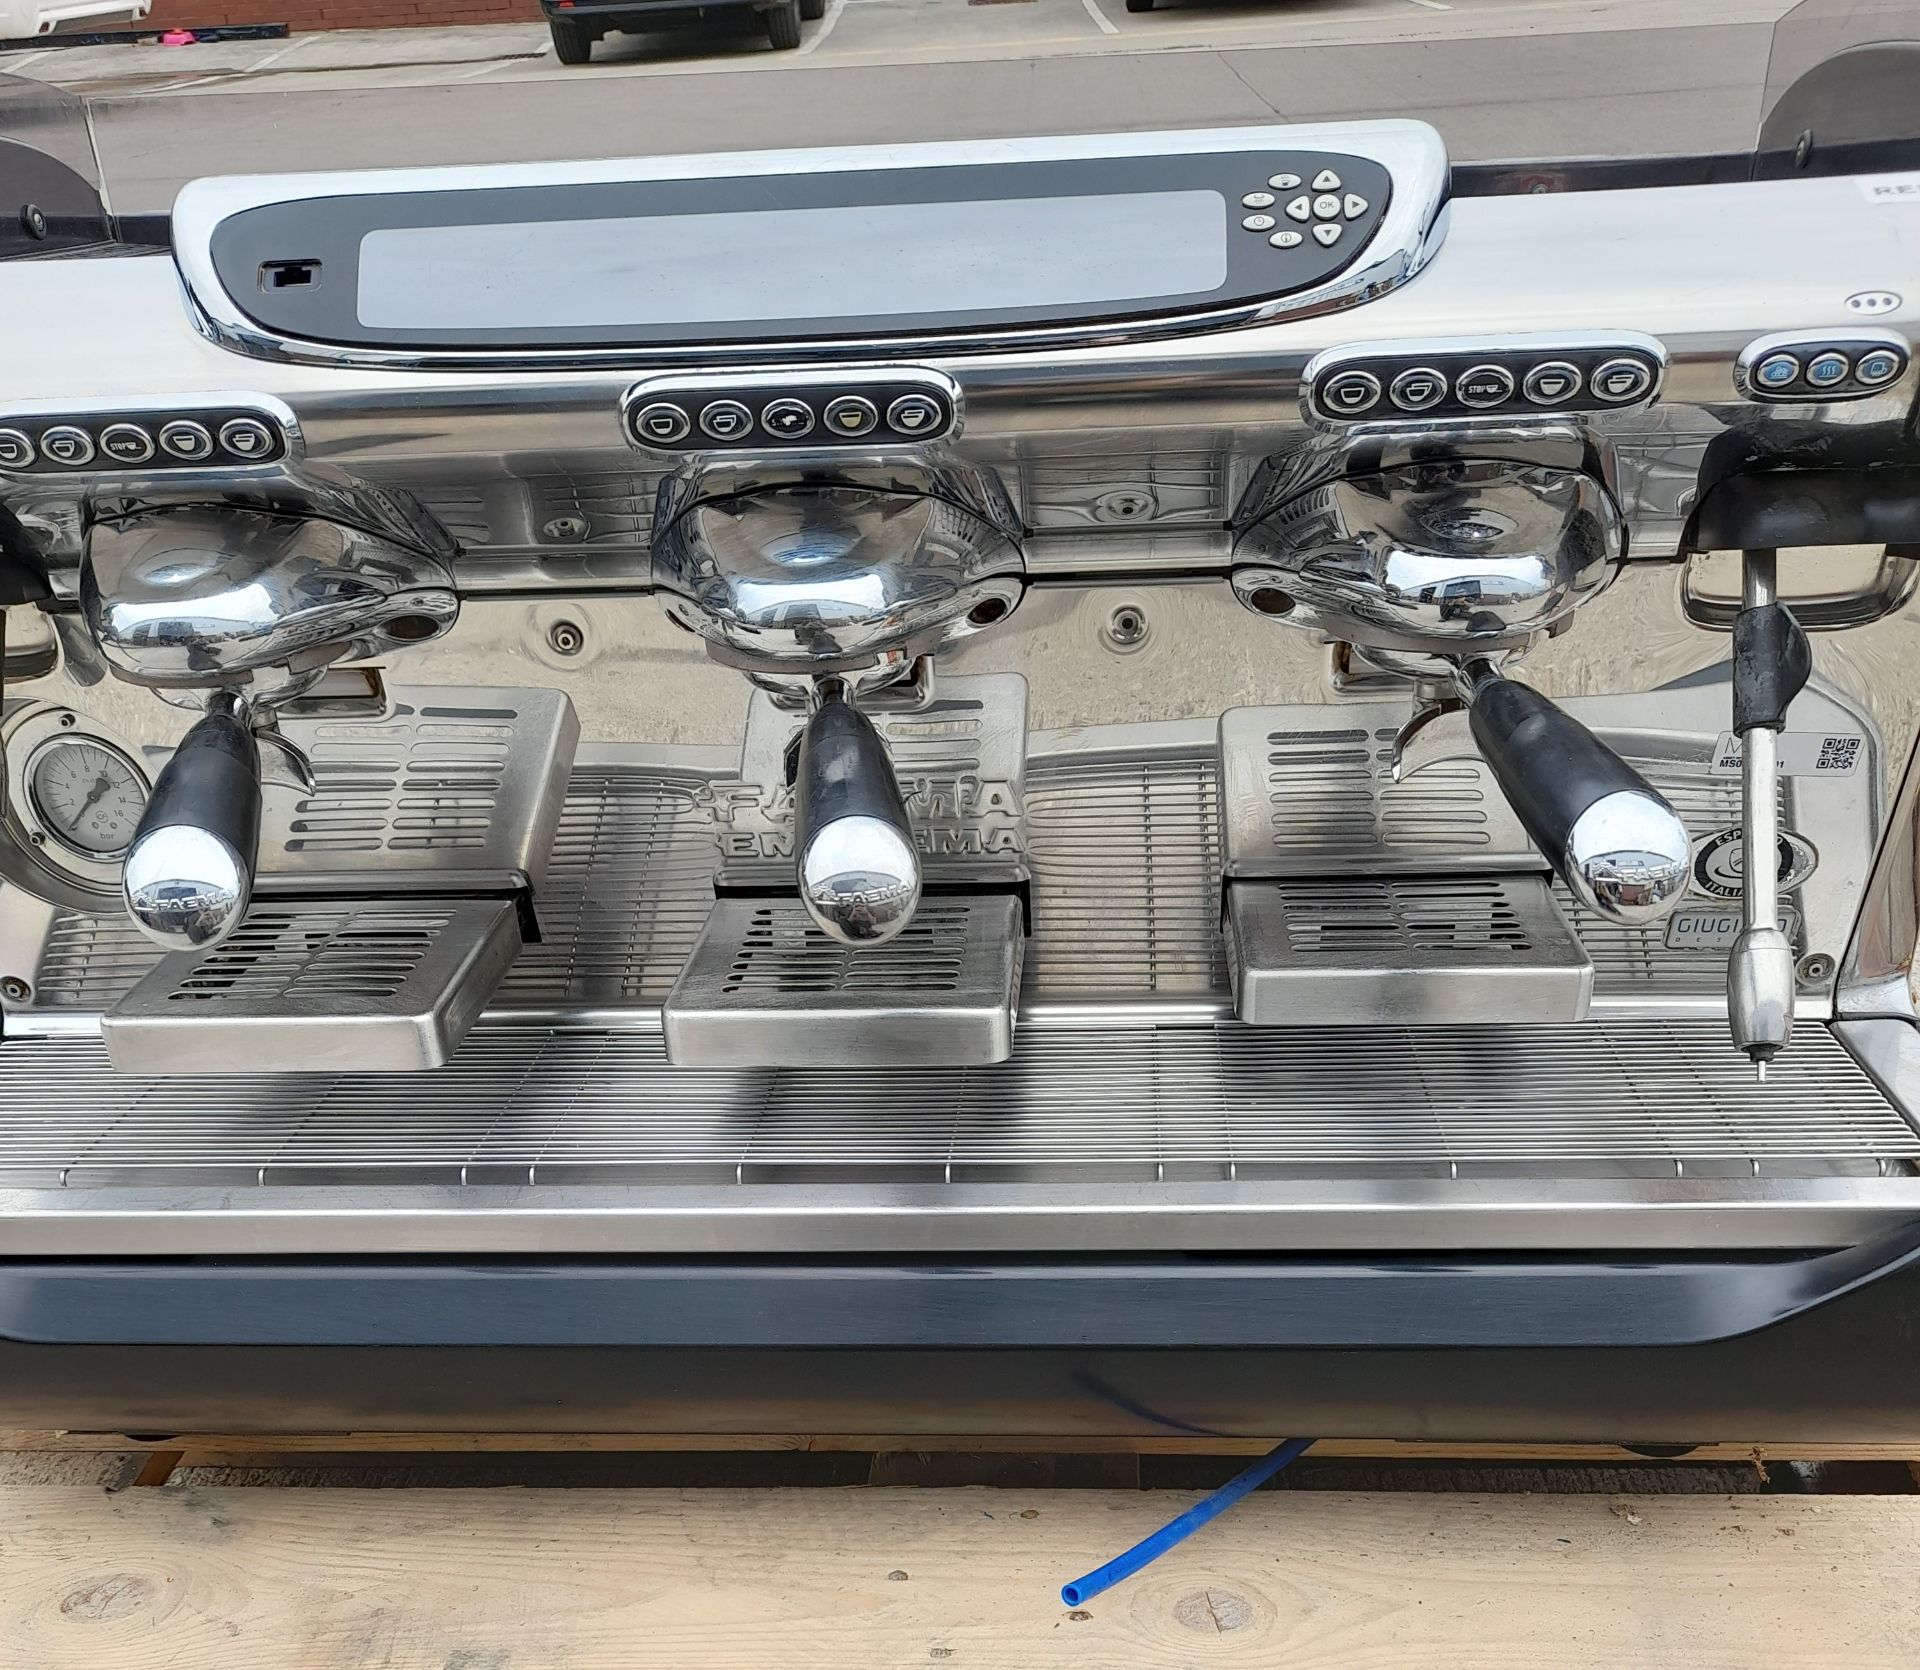 1 x Faema Emblema 3 Group Espresso Coffee Machine - 3 Phase Power - Stainless Steel Finish - Image 4 of 8